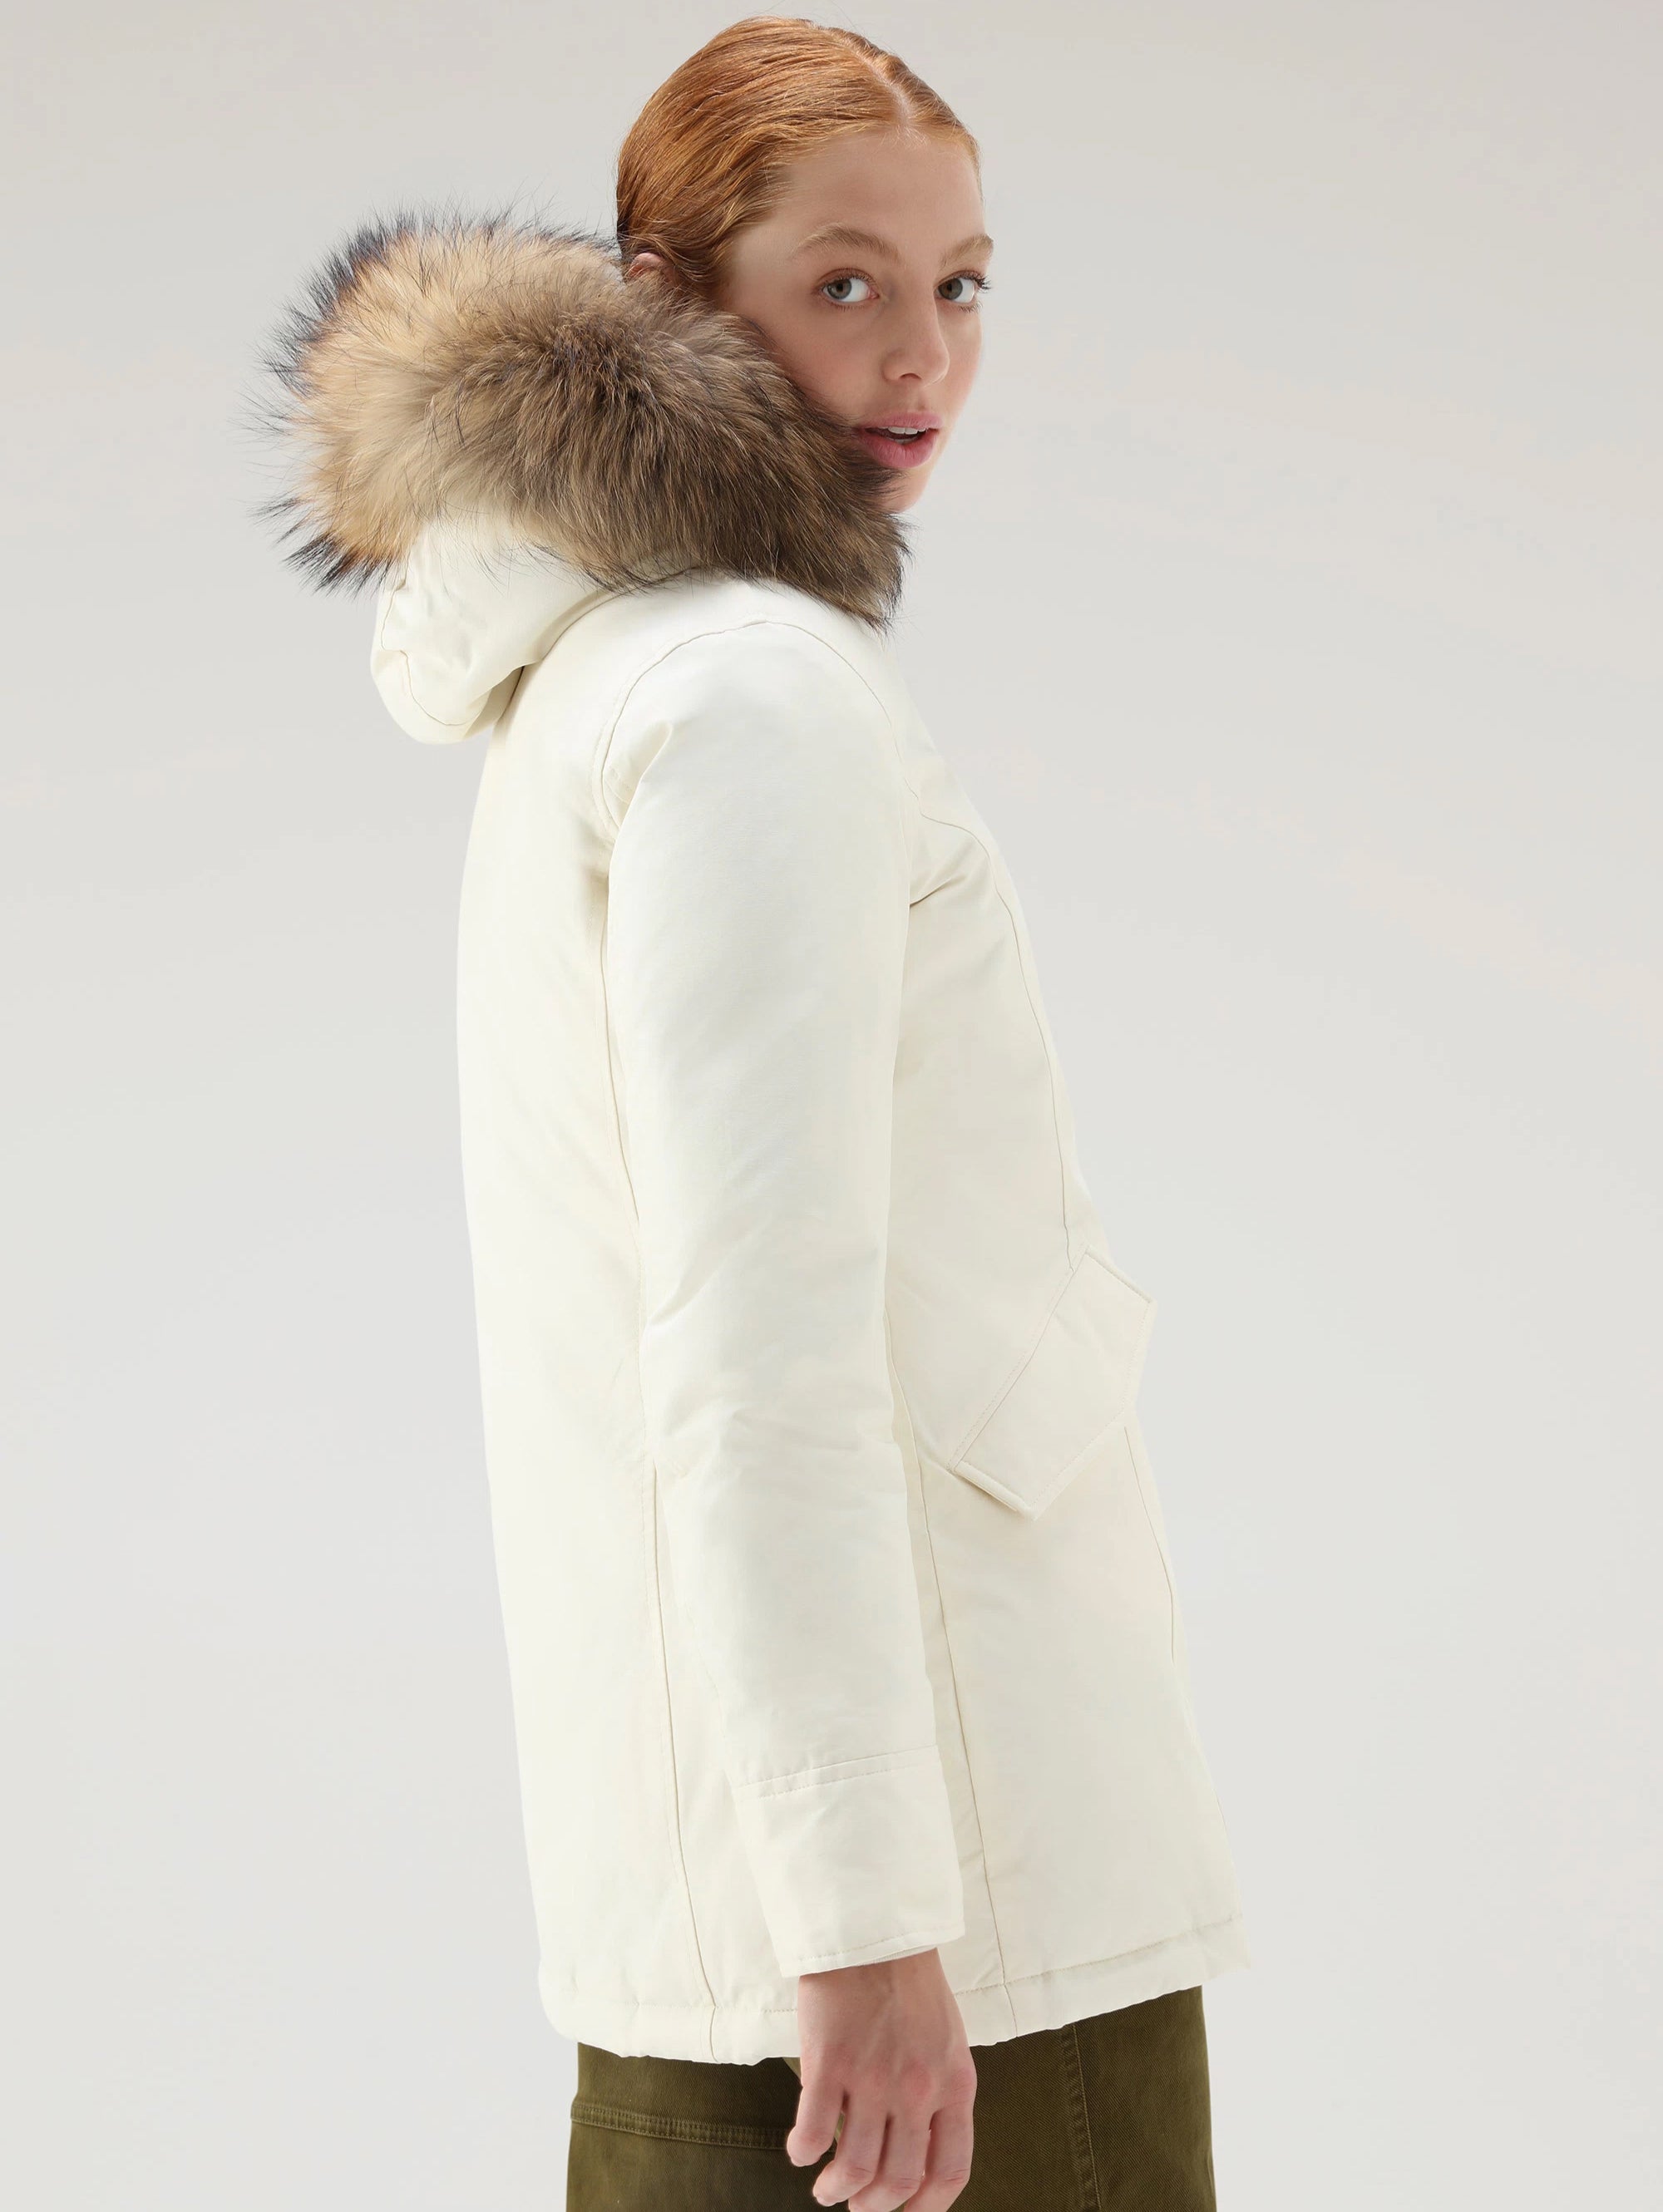 Parka Jacket with Hood in White Raccoon